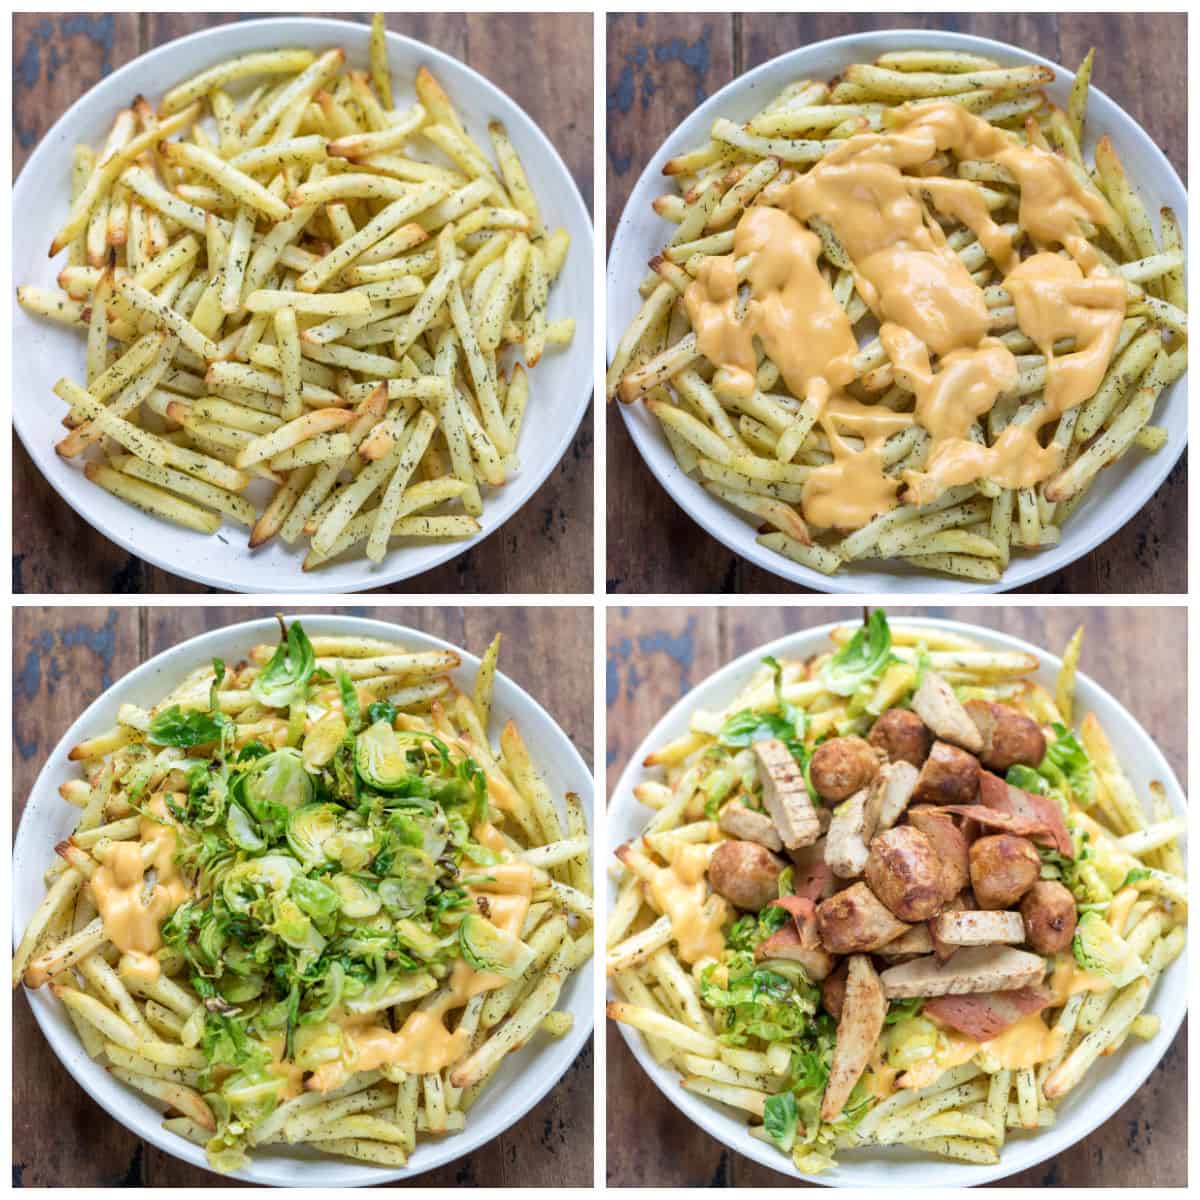 Collage of adding leftovers toppings to a plate of fries.